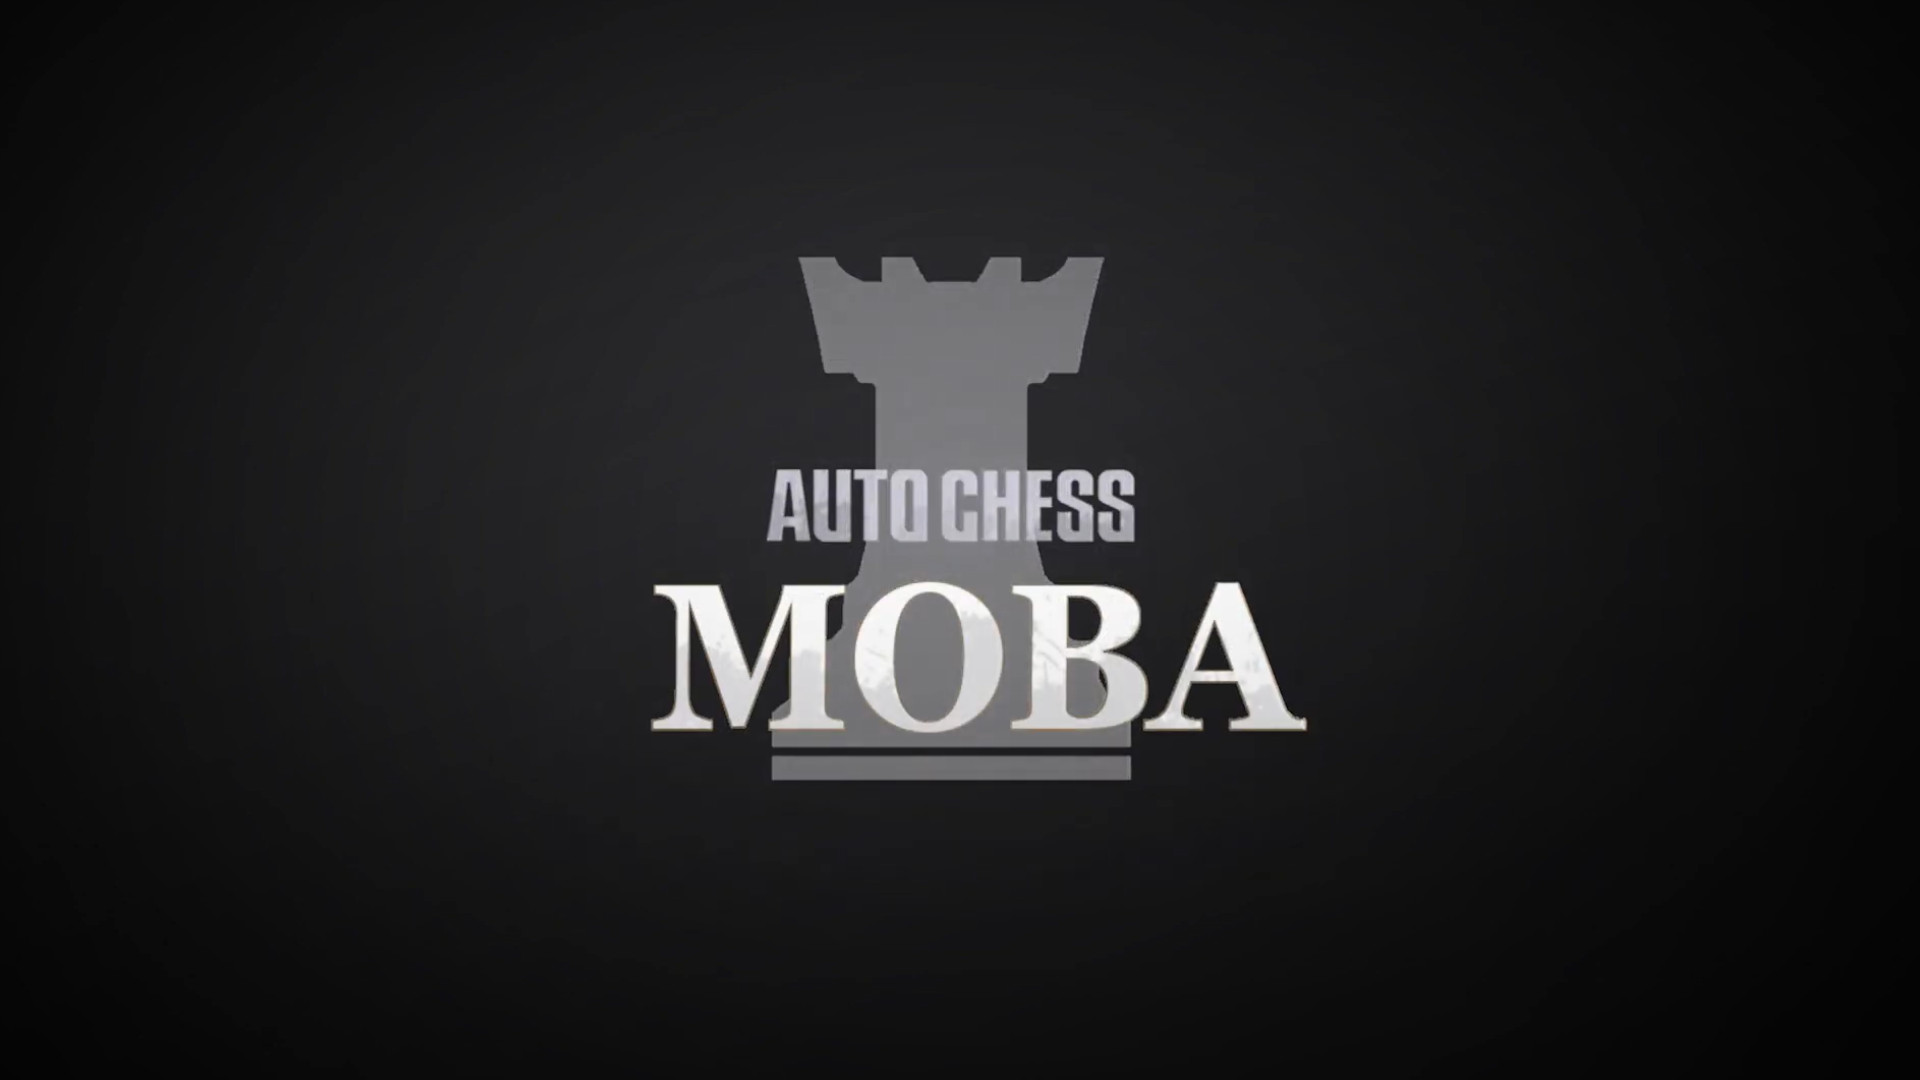 Auto Chess, the Dota 2 spin-off, gets its own MOBA